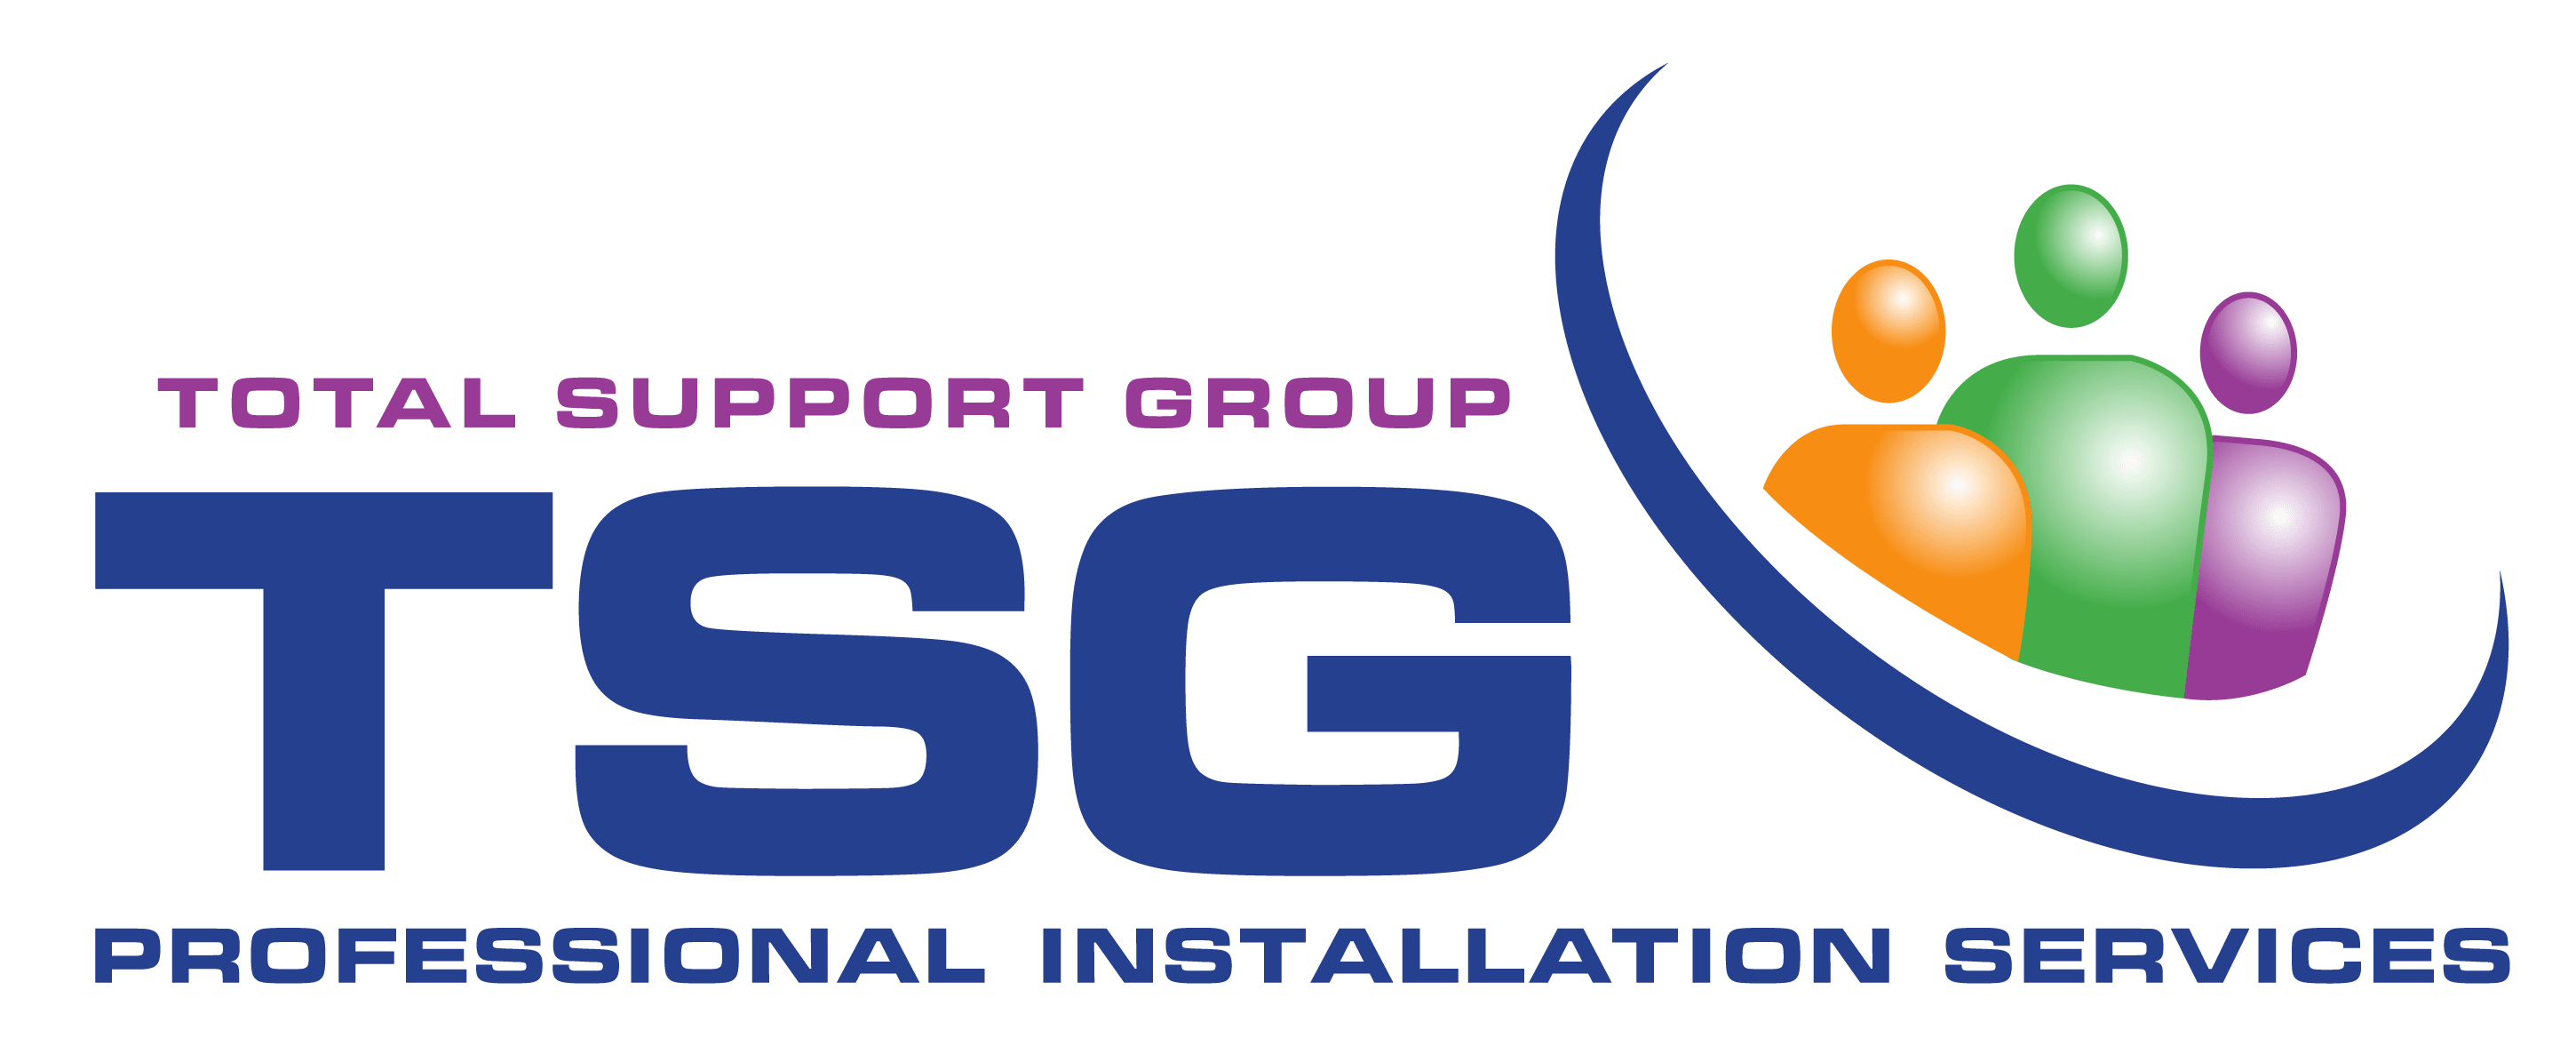 Installations and technical services